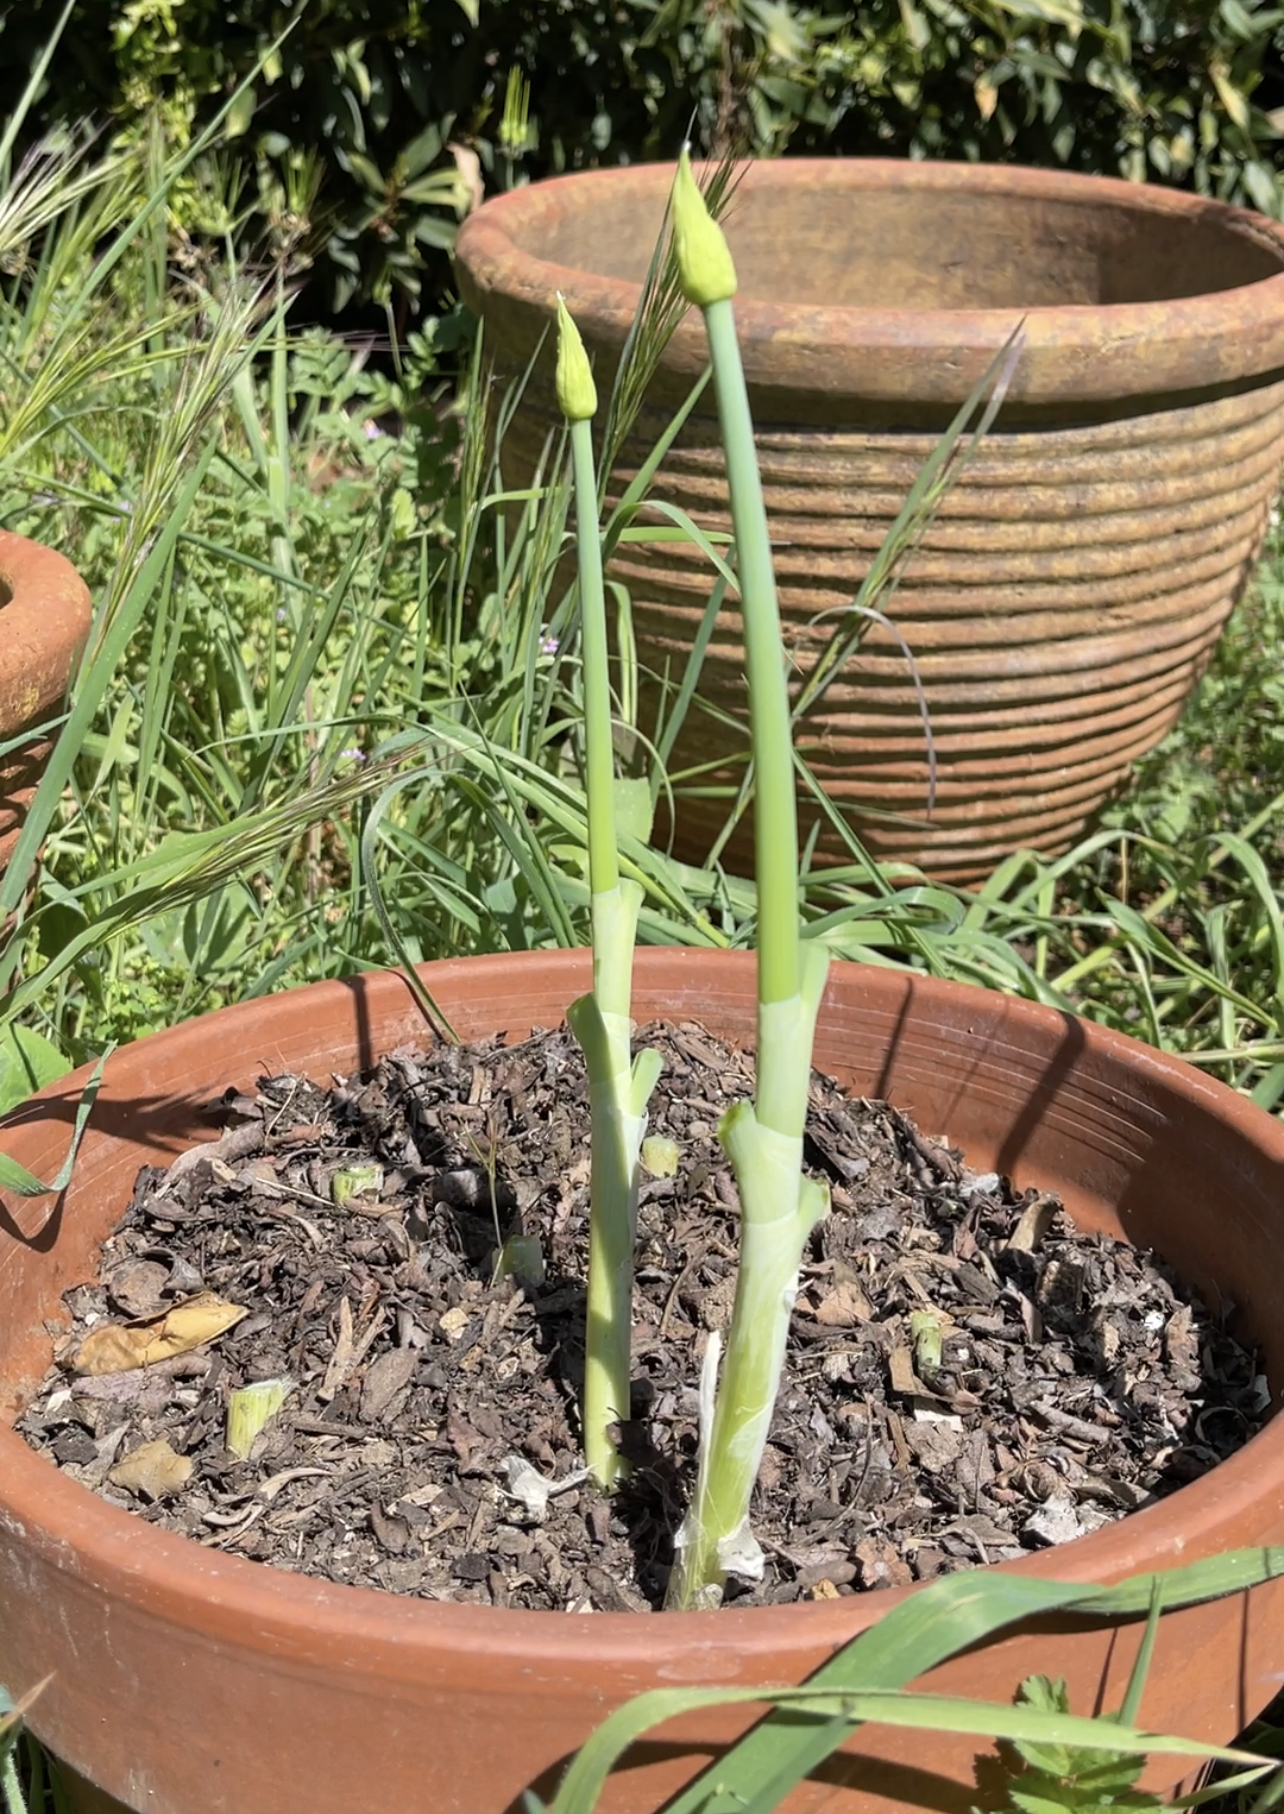 Two green onions in a terra cotta pot outside. They are going to seed at the ends.